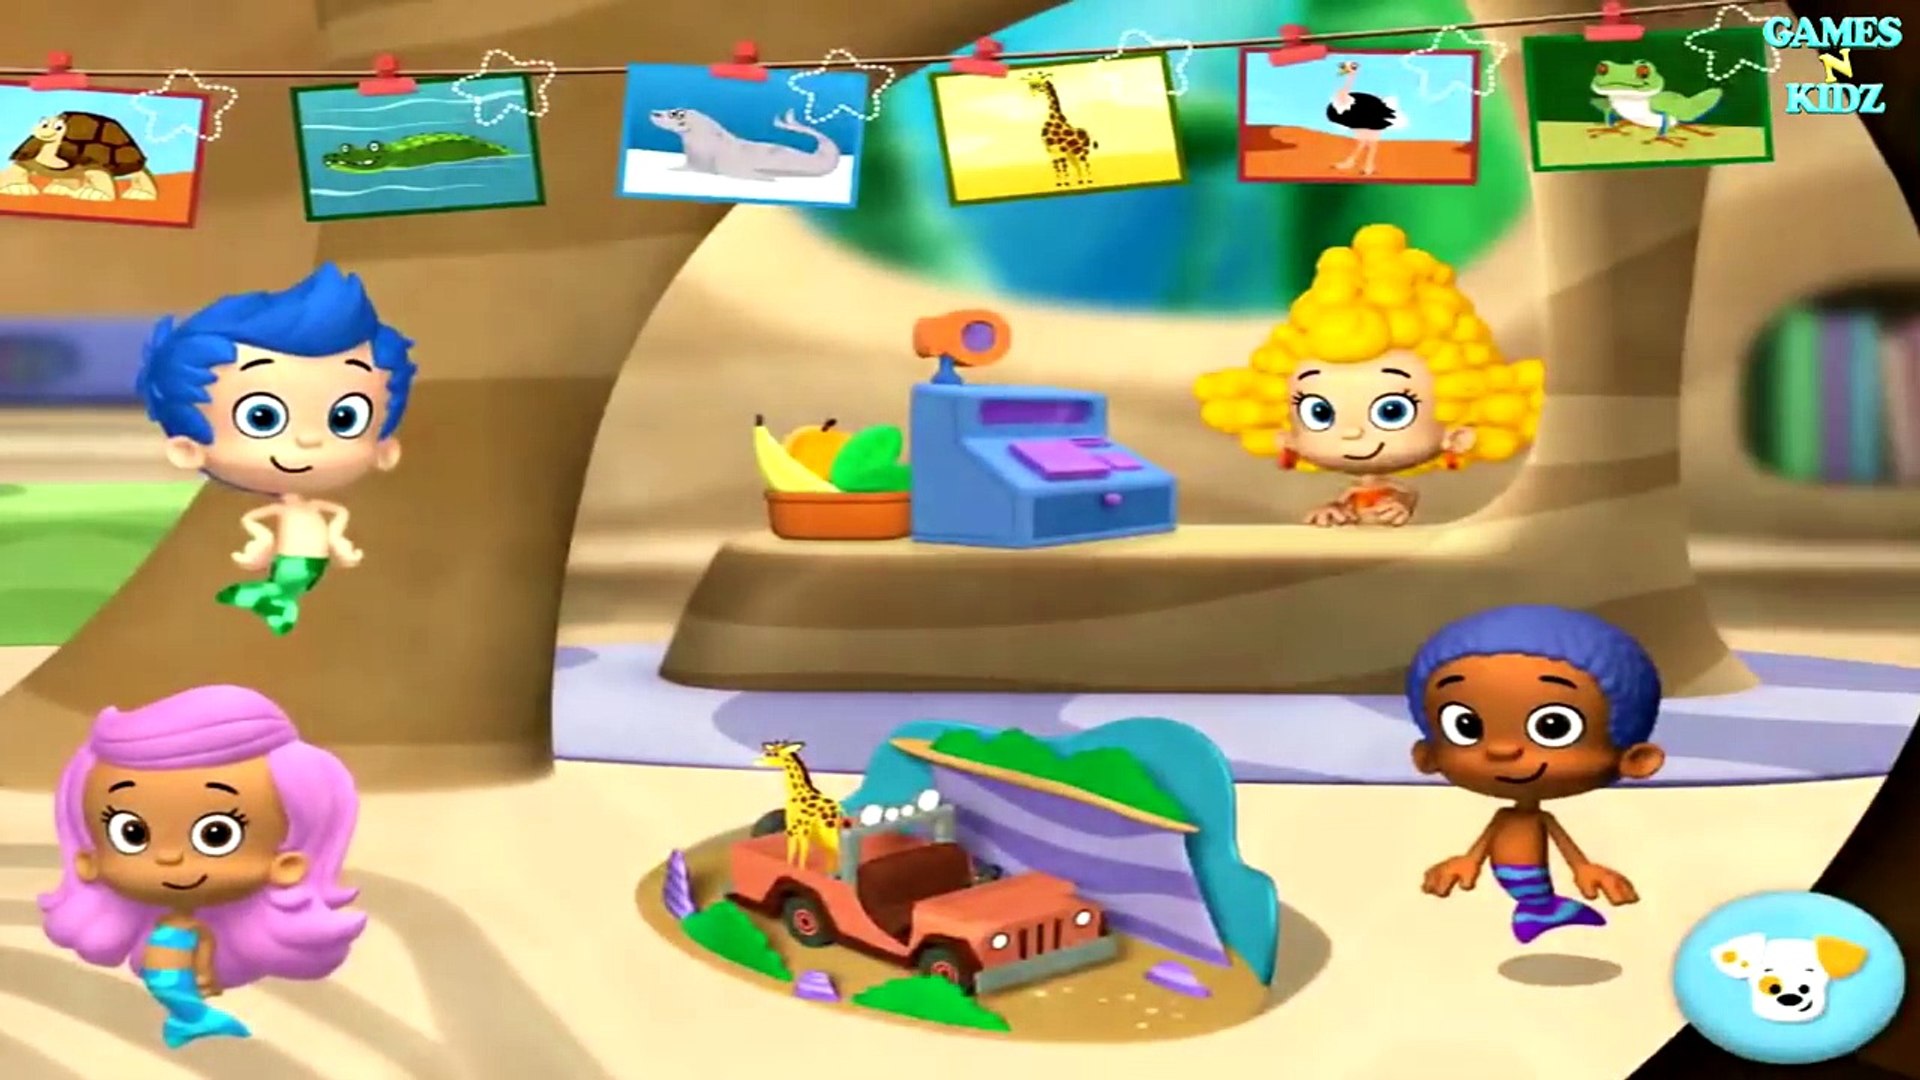 Bubble Guppies GAMES Episodes Animal School Day - Learn Animals Nick Jr.  videos for kids # - video Dailymotion